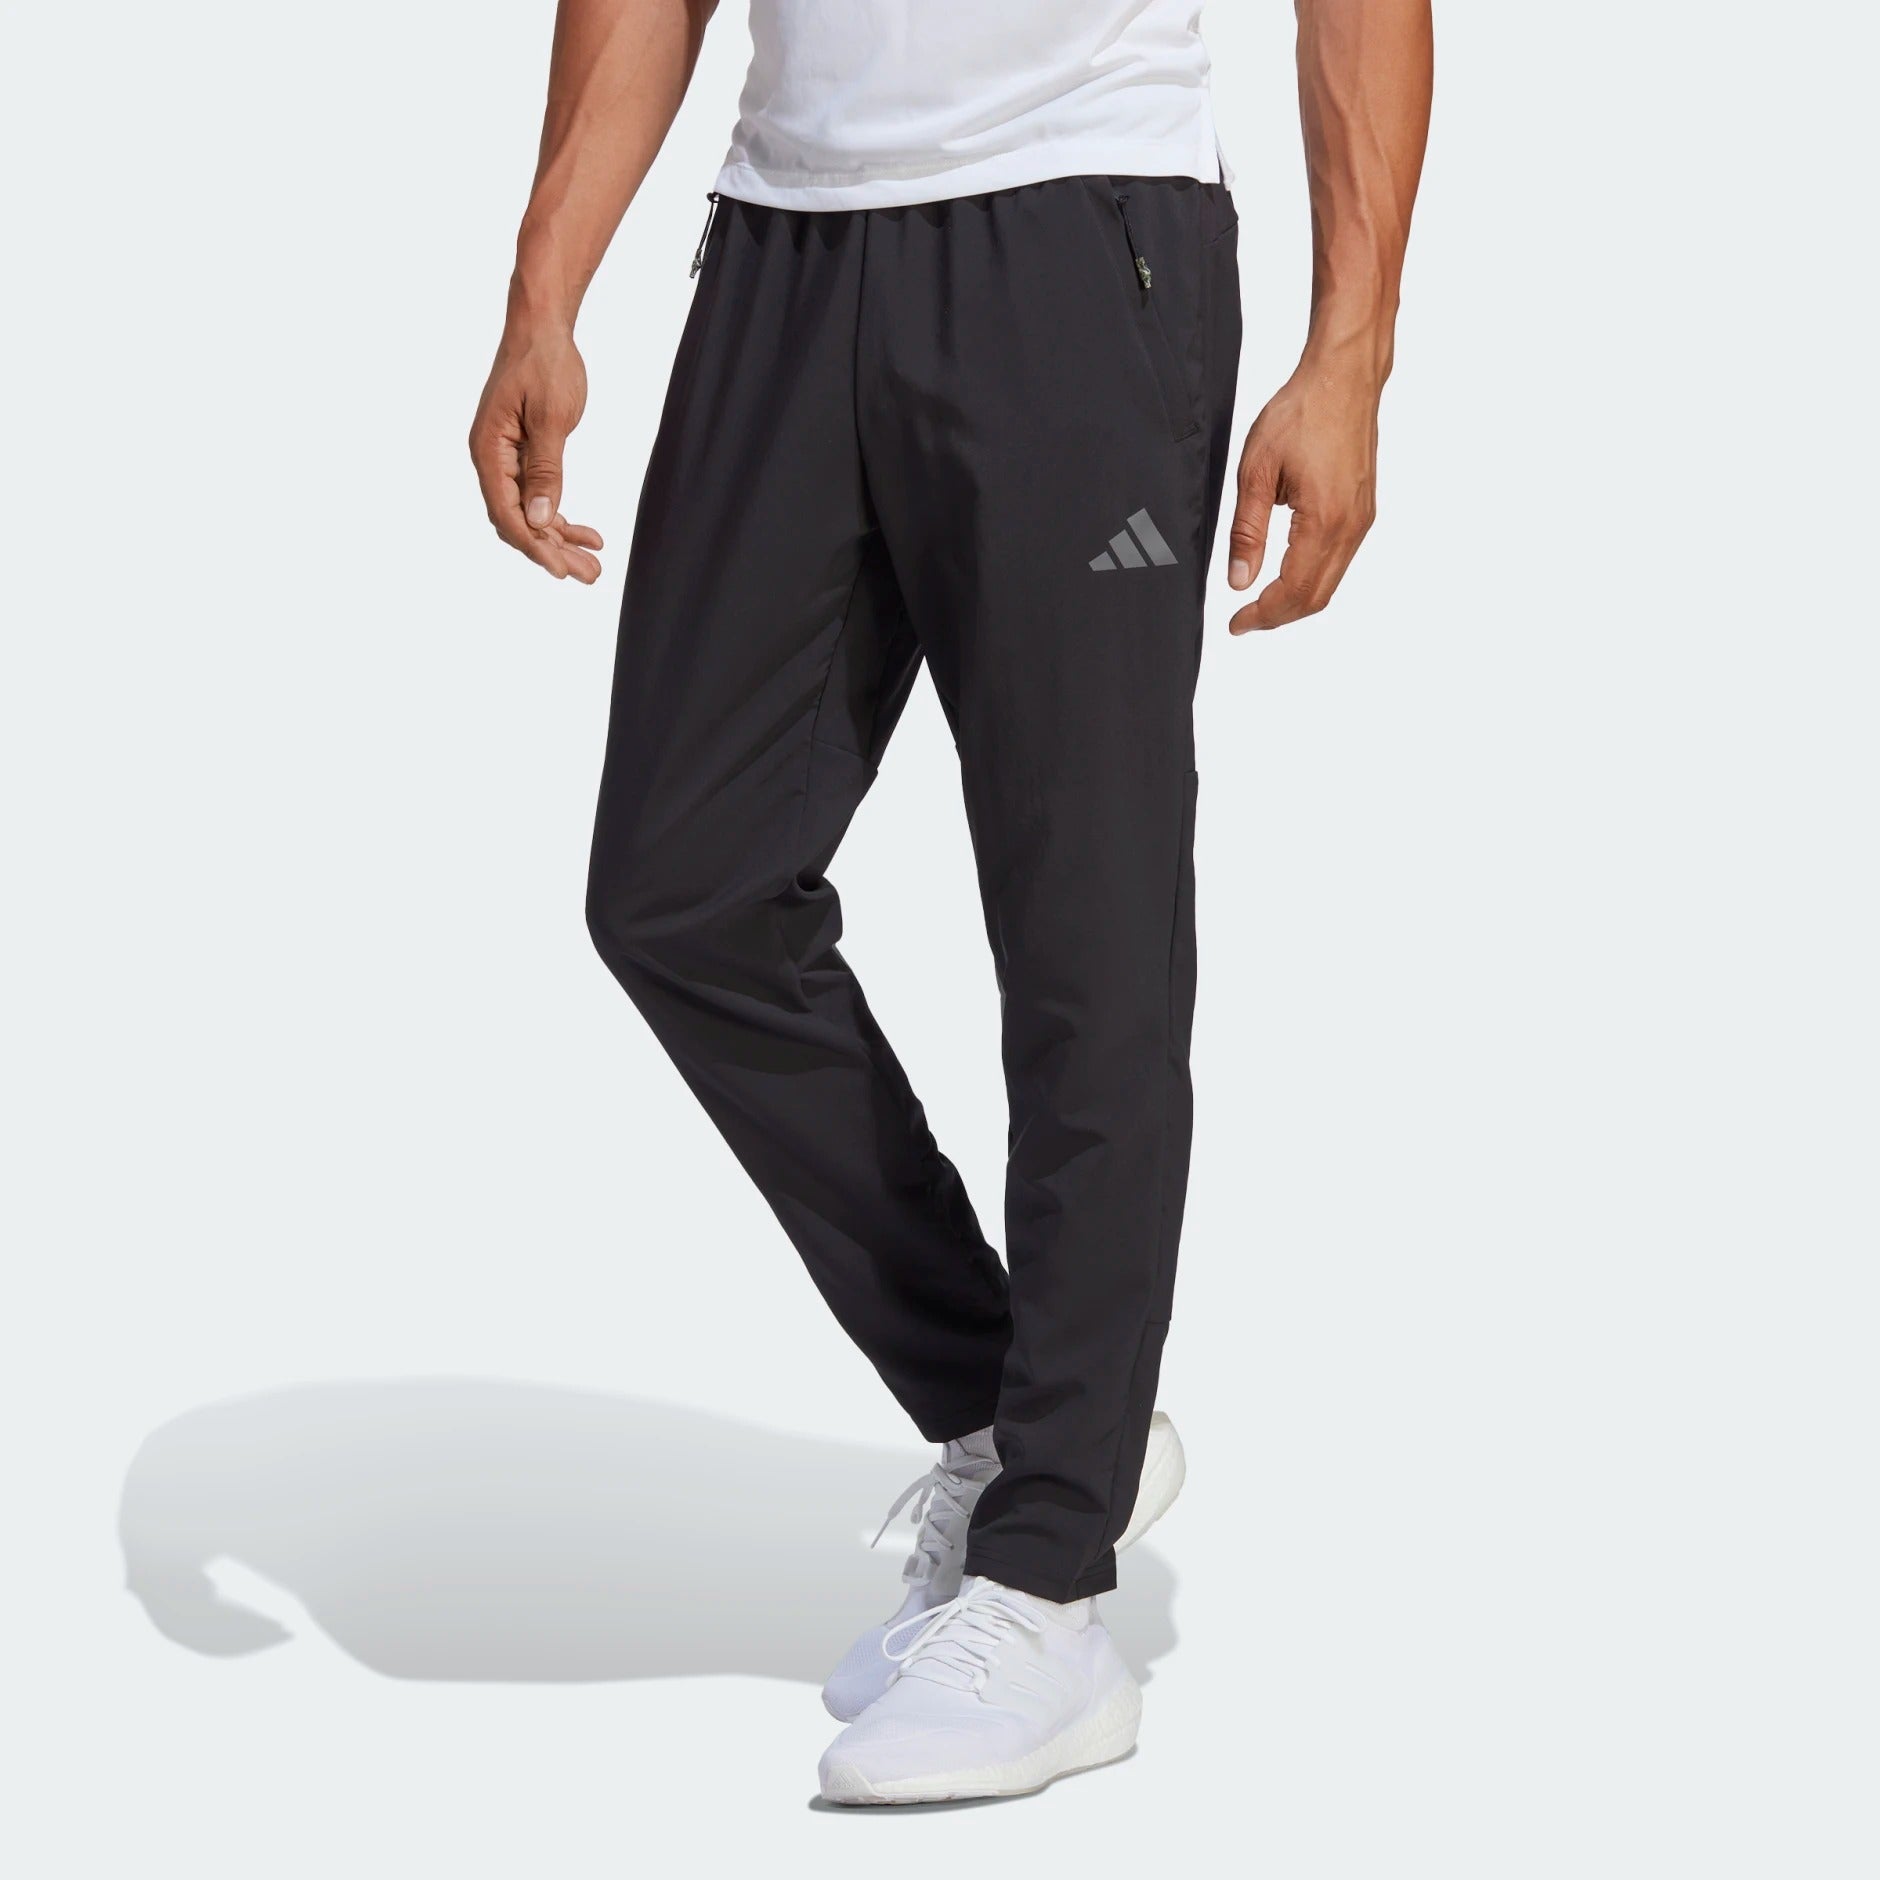 Men's Workout Pants: Essential Gym Clothes From Track Pants to Joggers |  Kohl's